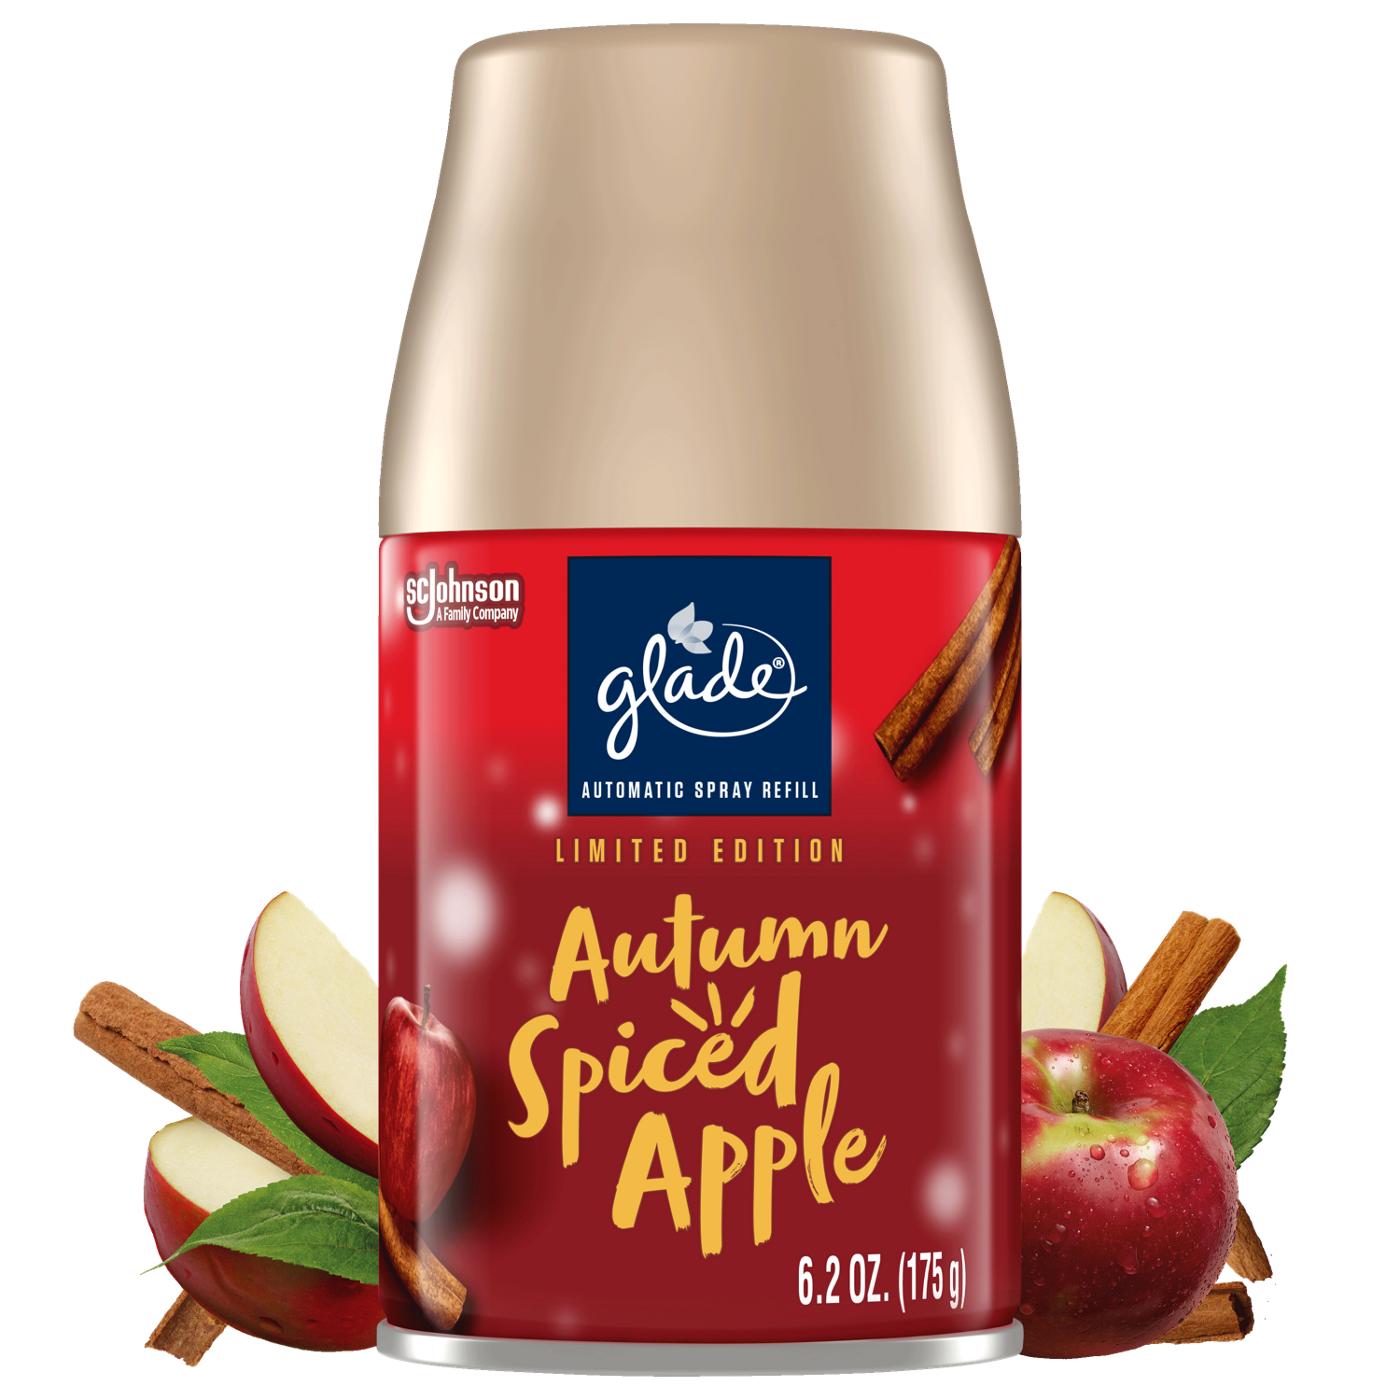 Glade Automatic Spray Refill - Autumn Spiced Apple; image 1 of 2